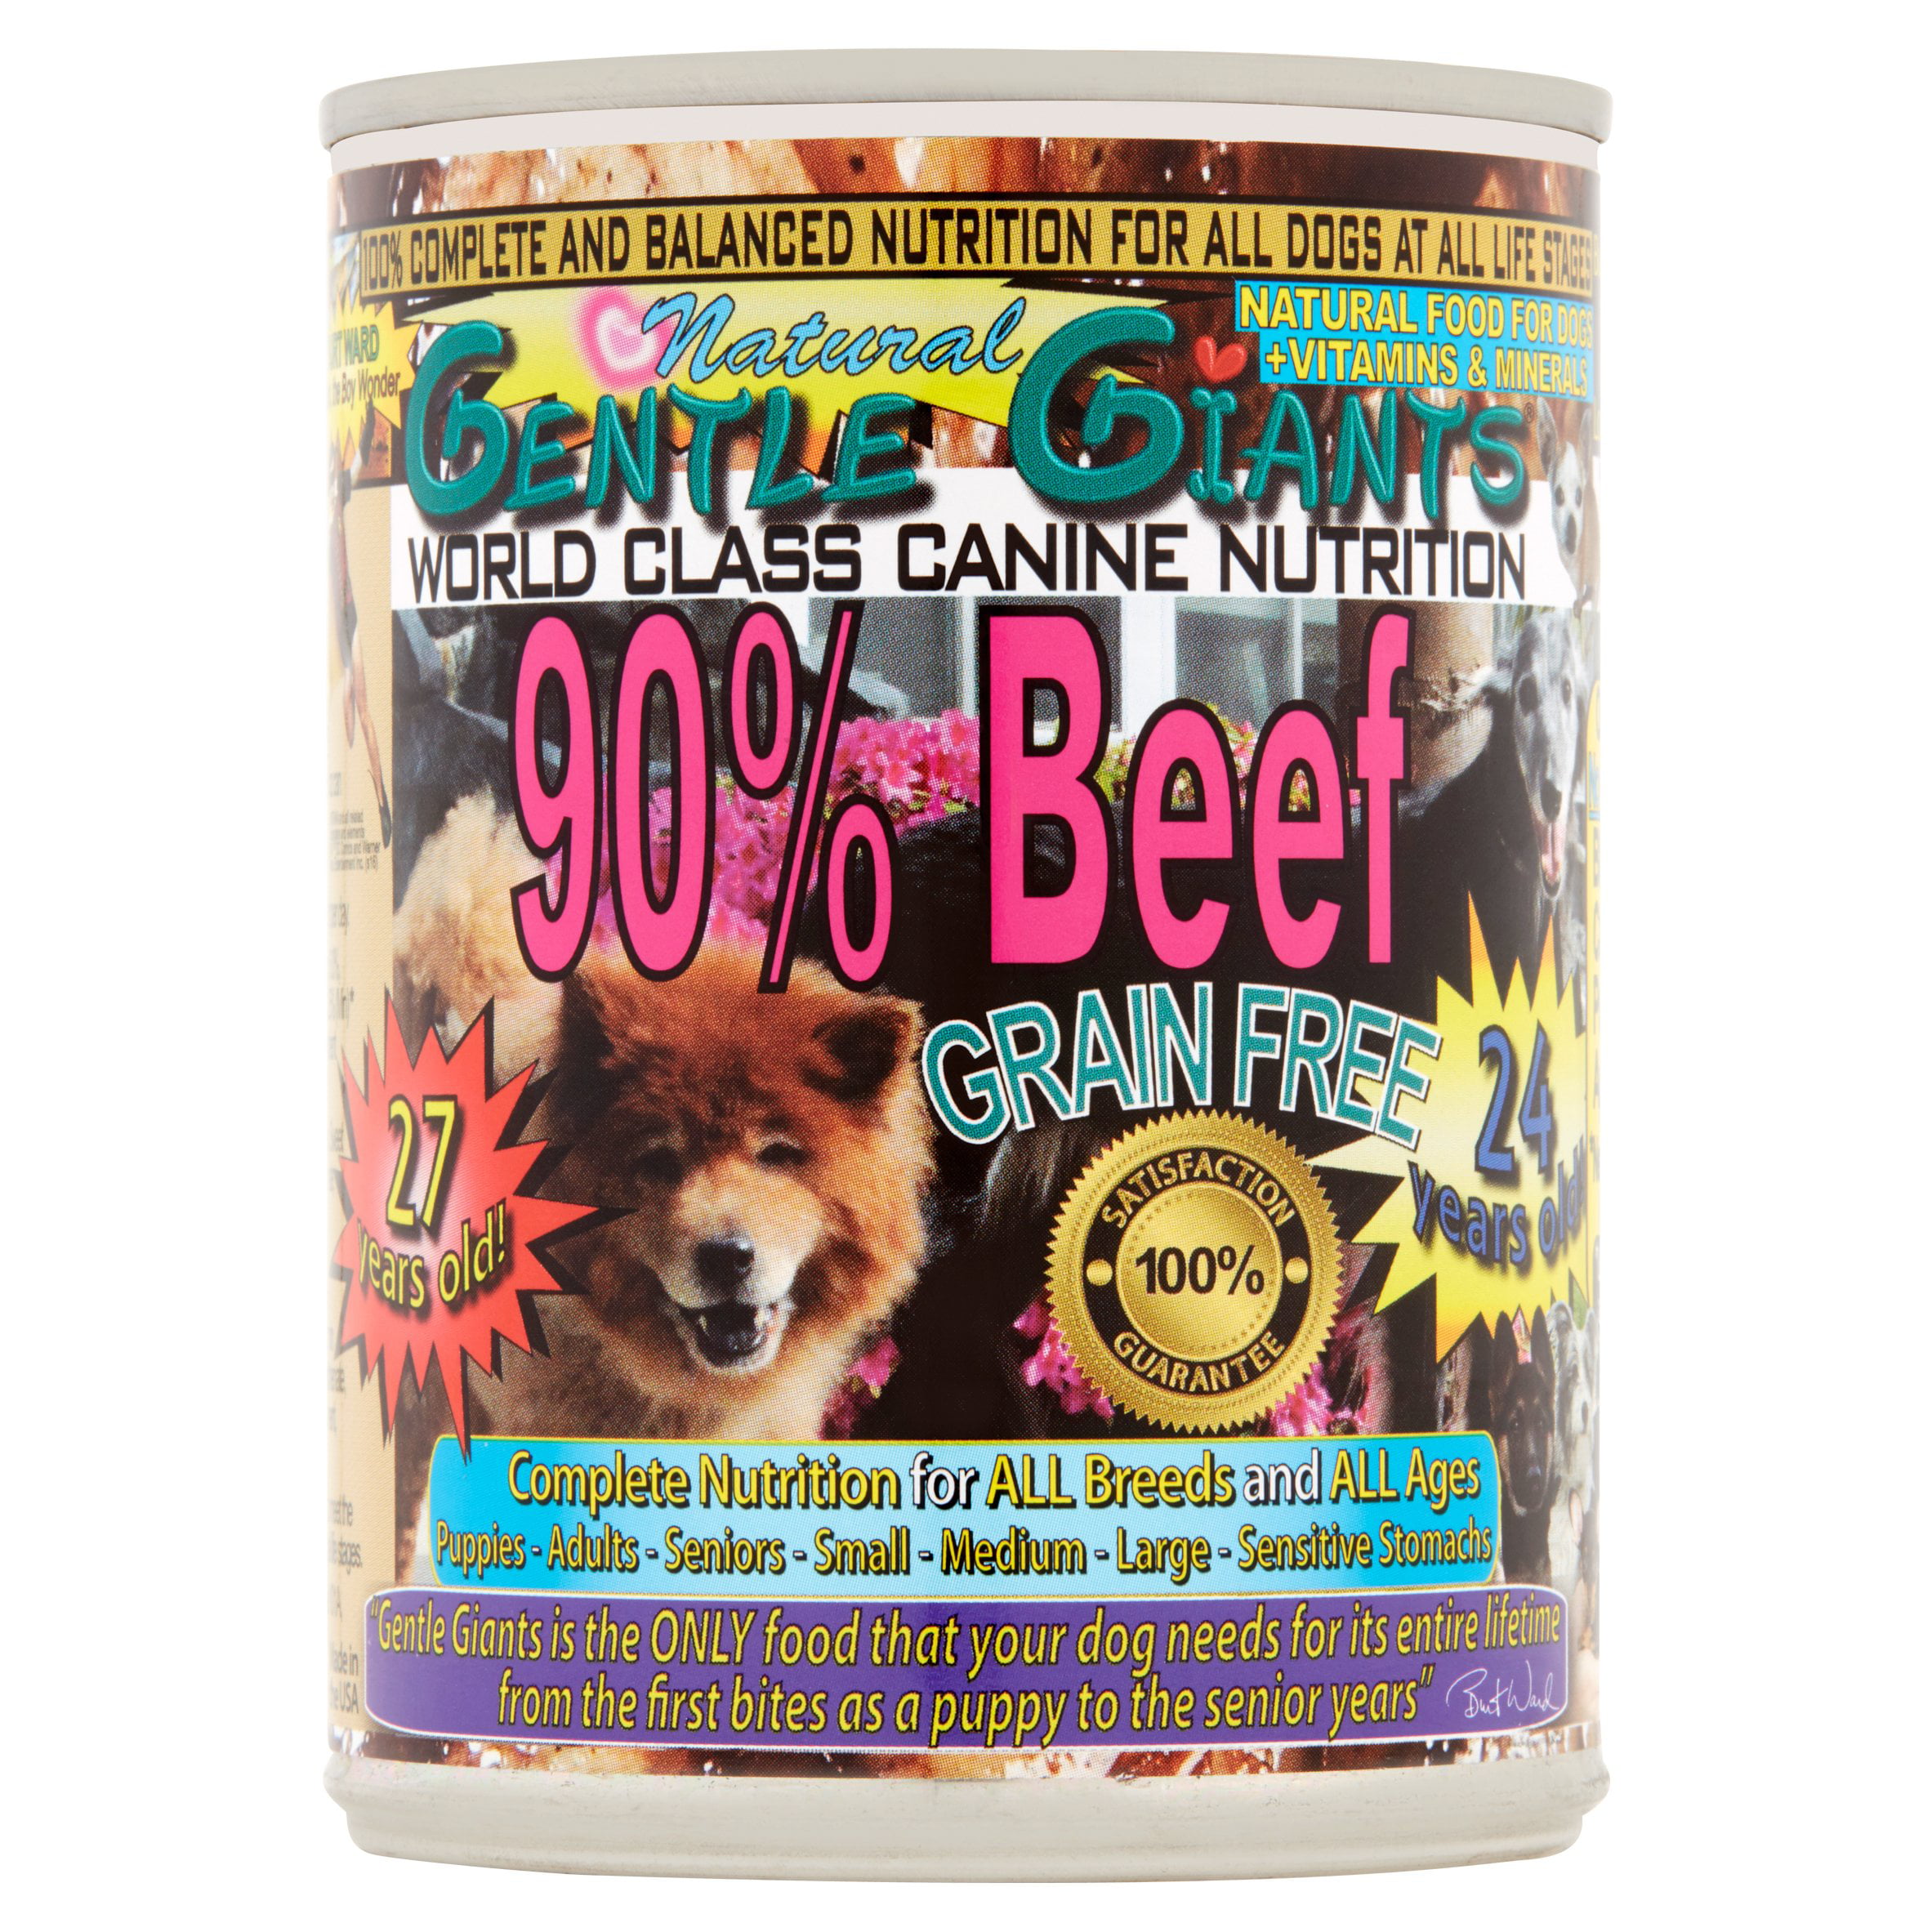 Gentle Giants Canine Nutrition 90 Beef GrainFree Canned